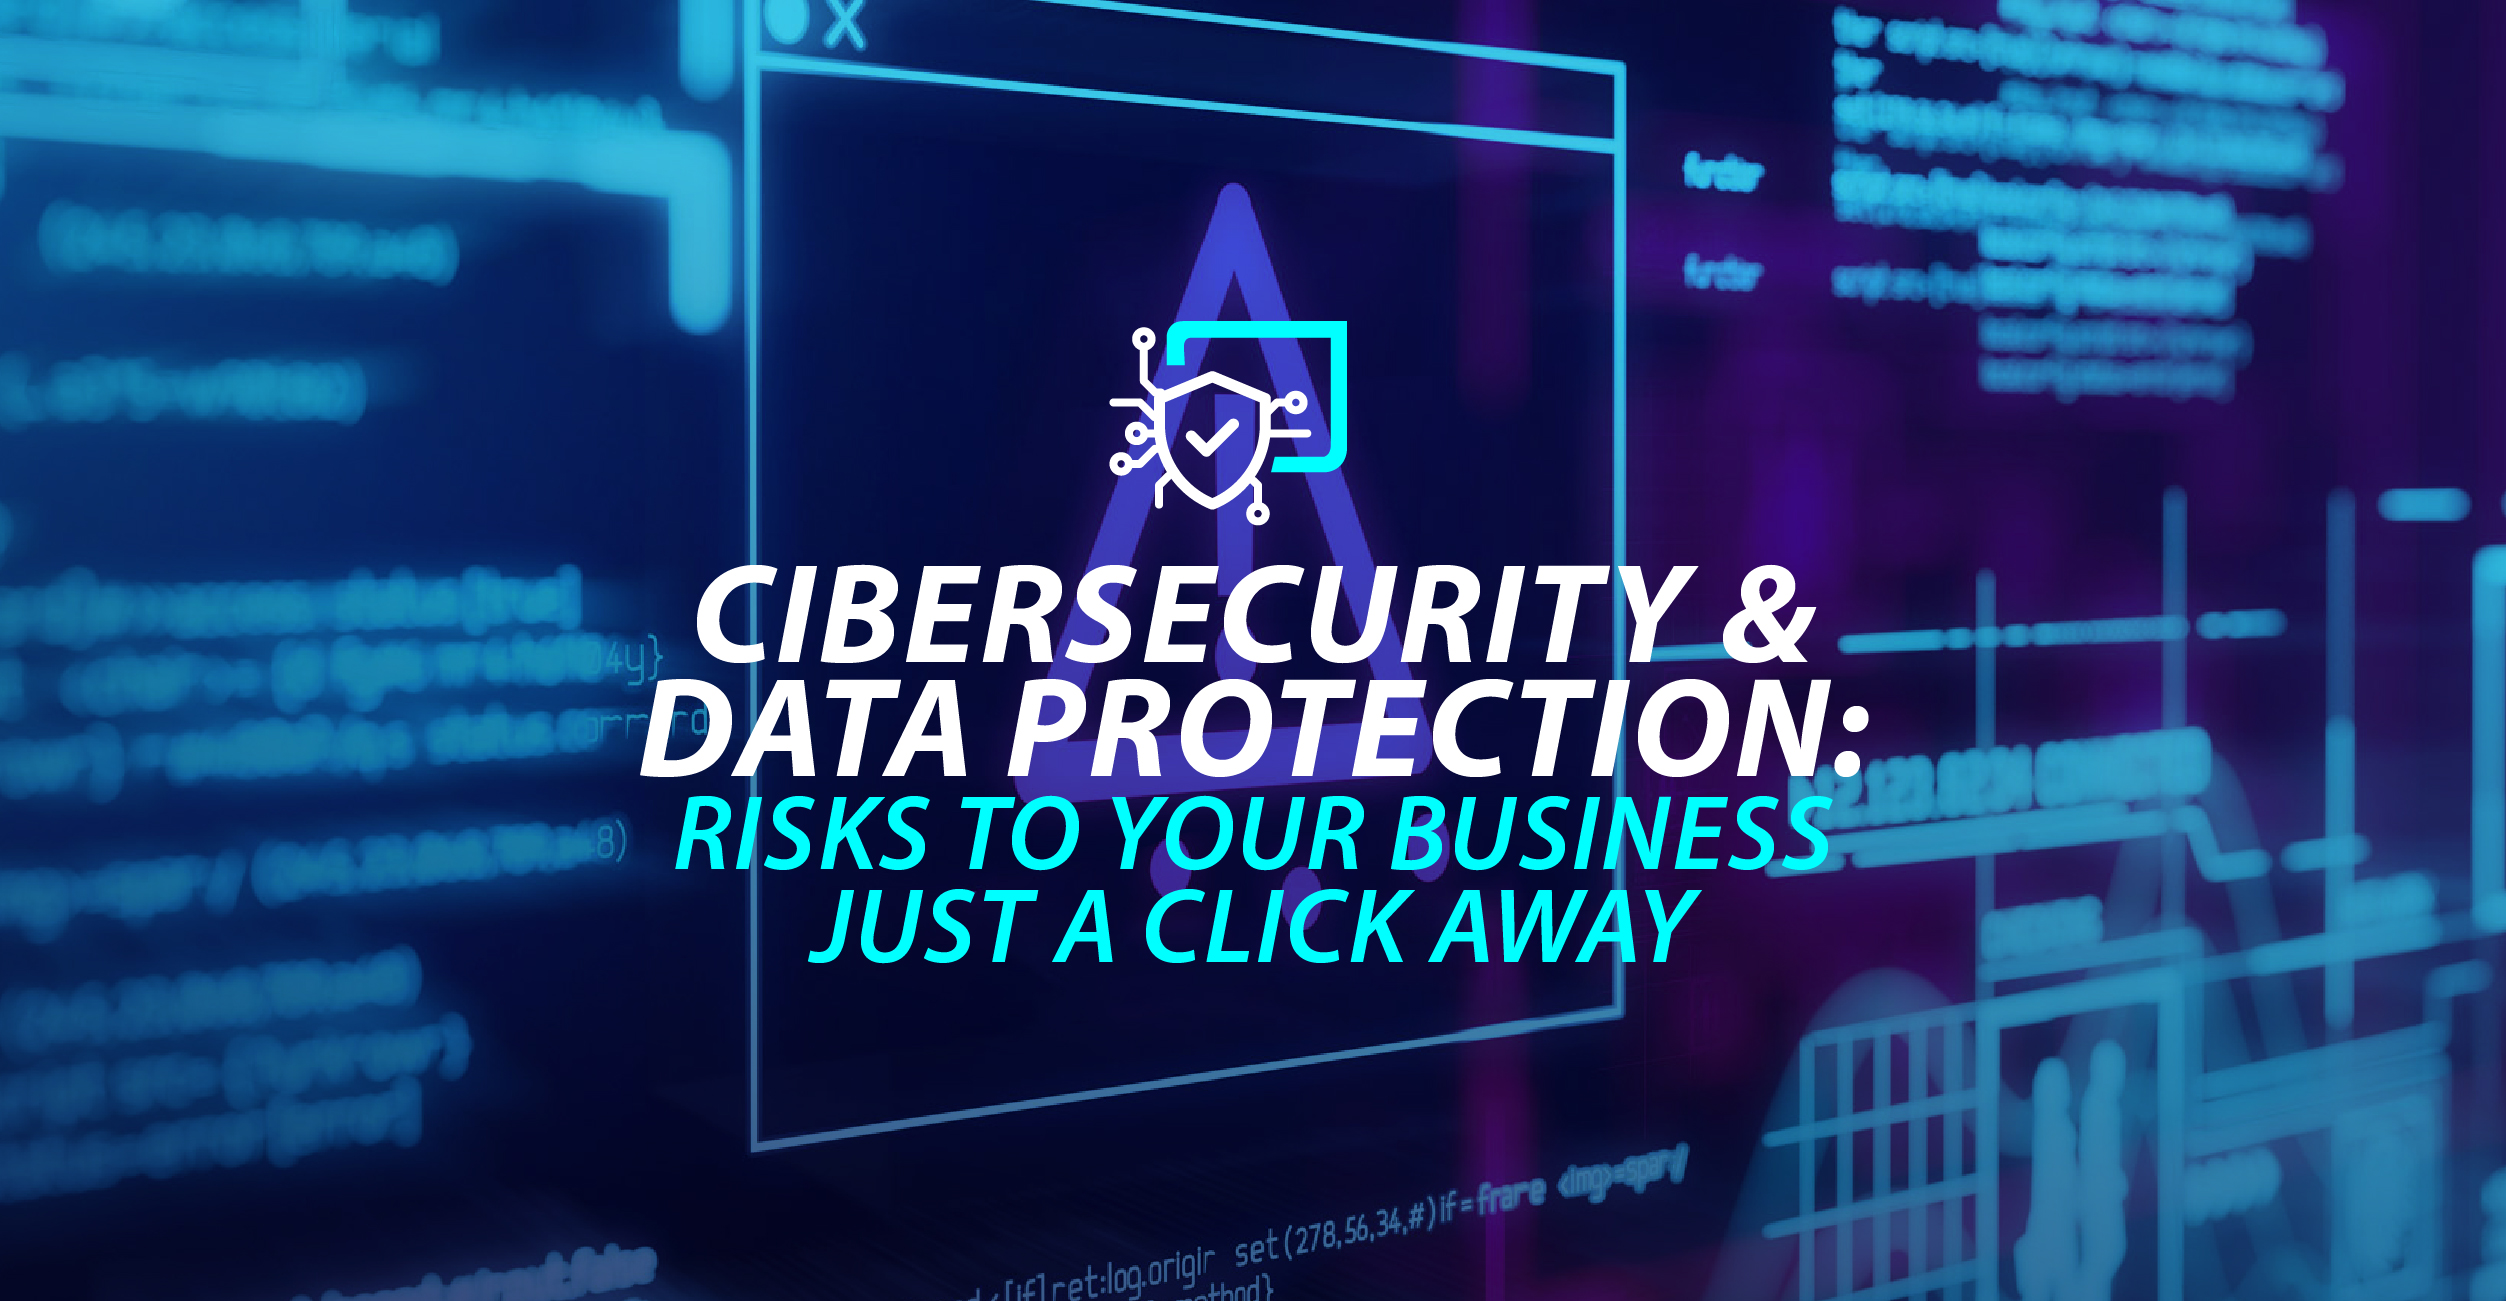 Cybersecurity & Data Protection: risks for your company just a click away